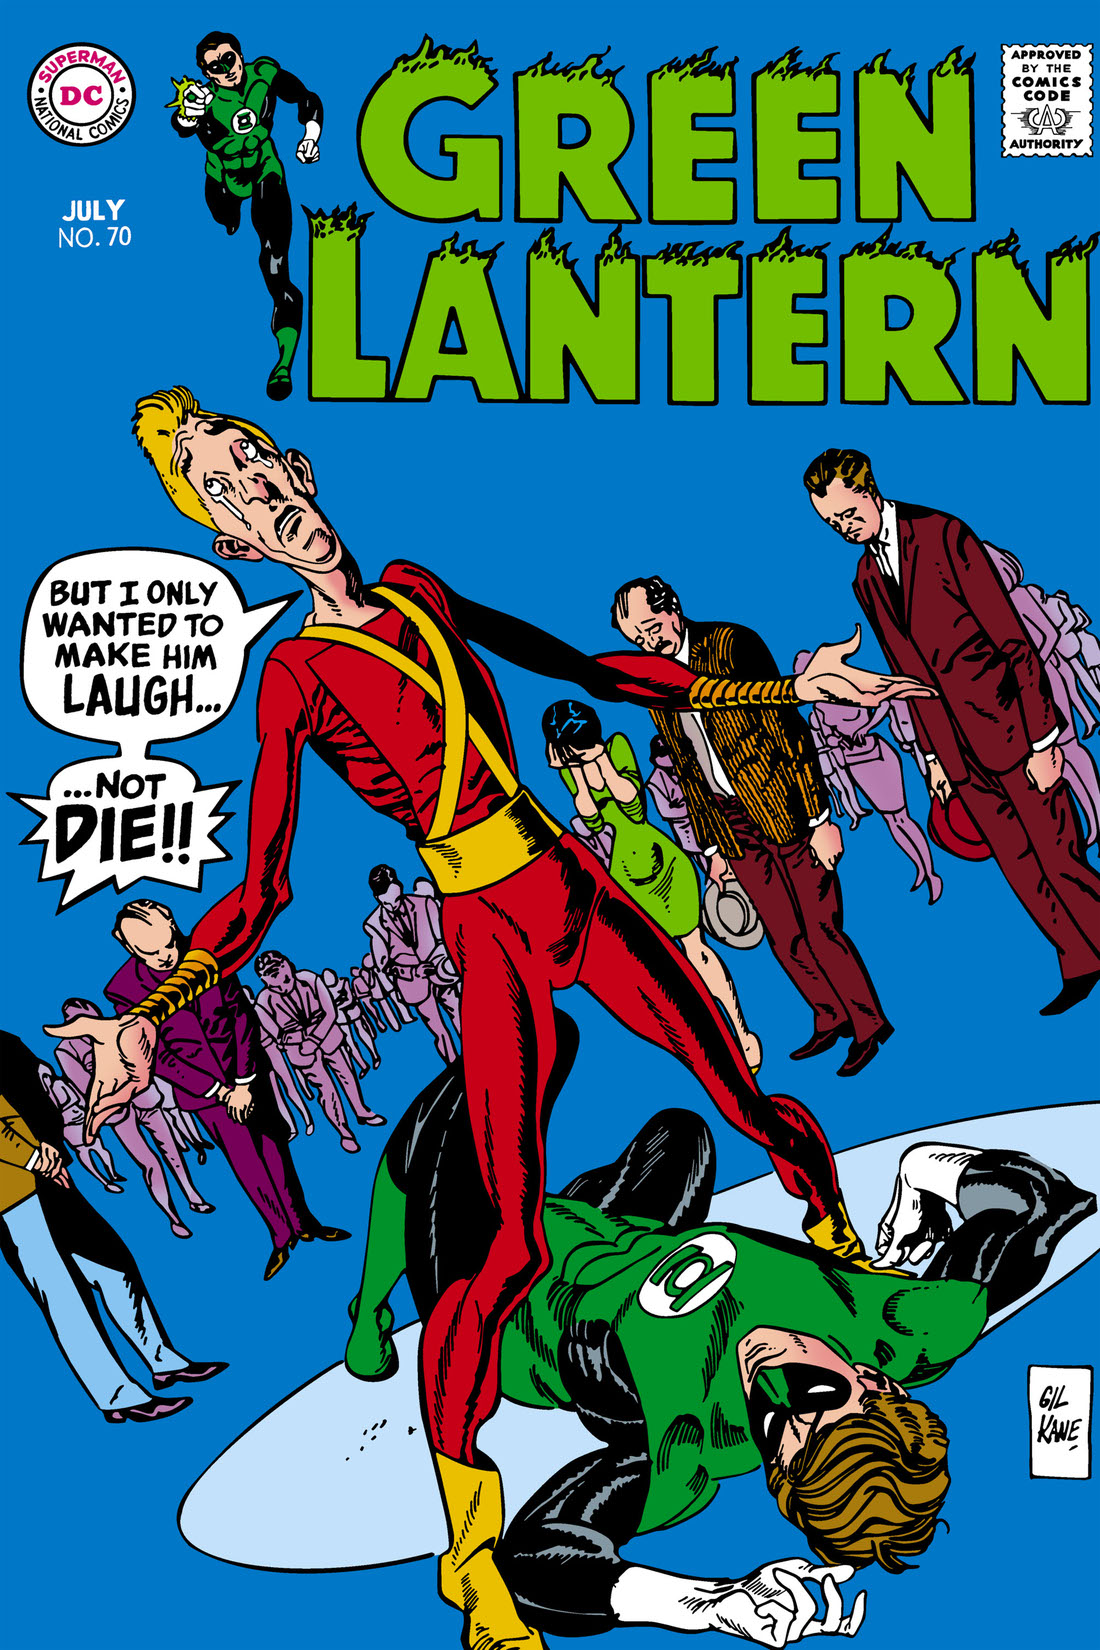 Green Lantern (1960-) #70 preview images